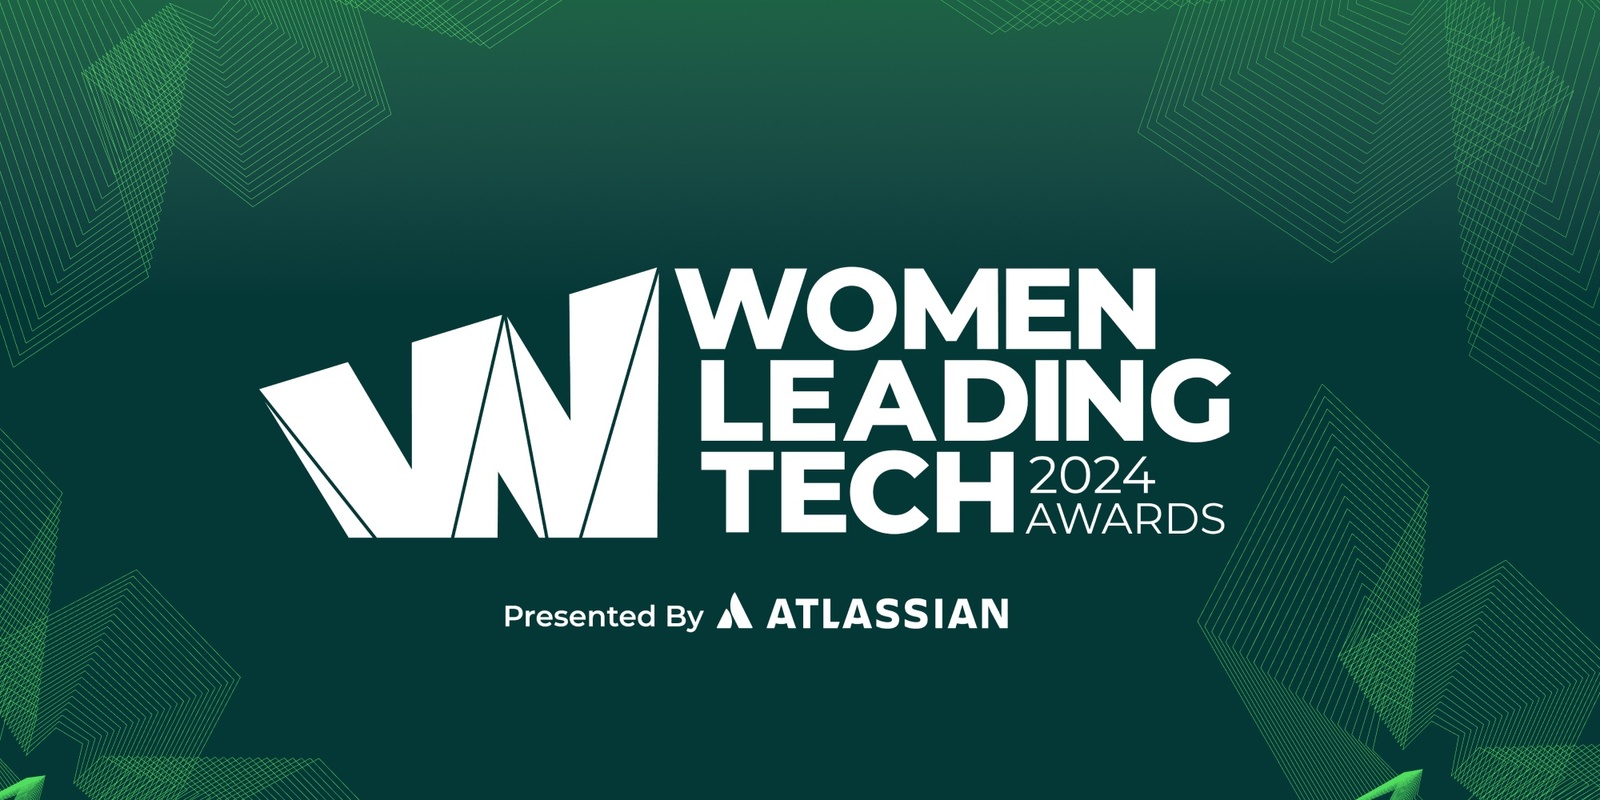 Banner image for B&T Women Leading Tech Awards 2024, presented by Atlassian